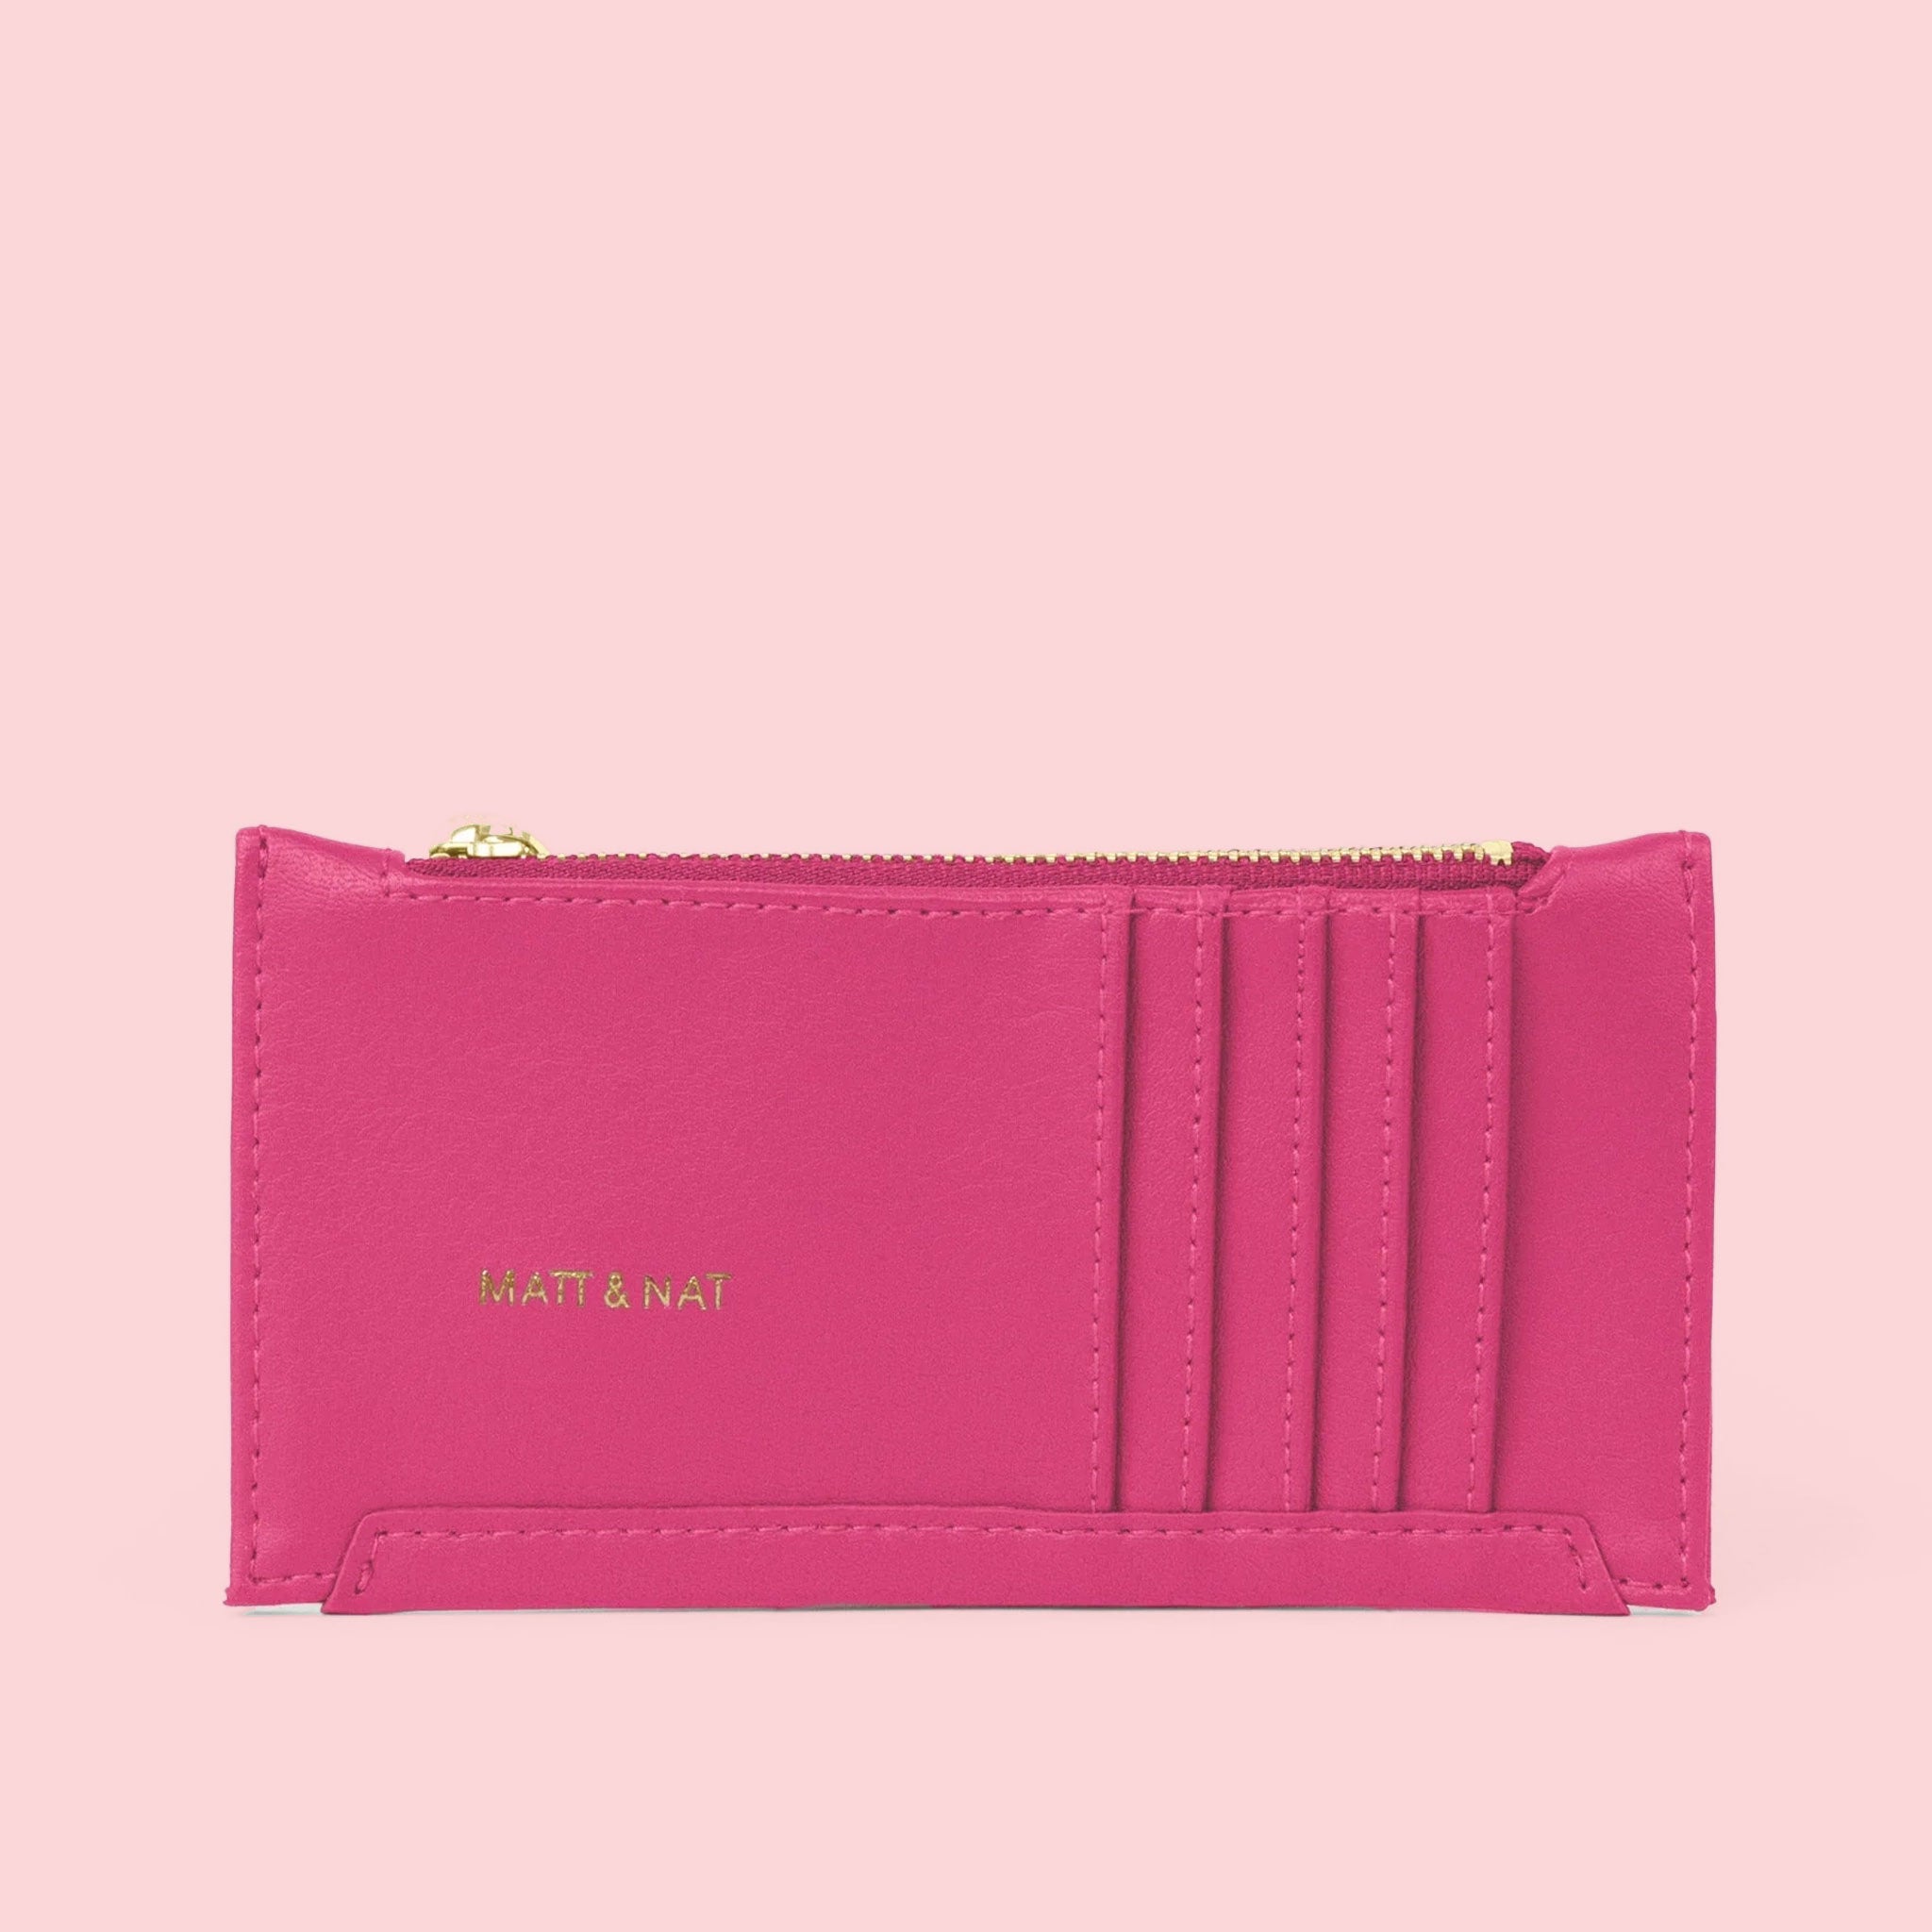 On a pink background is a hot pink wallet with card slots on the outside and a zipper.